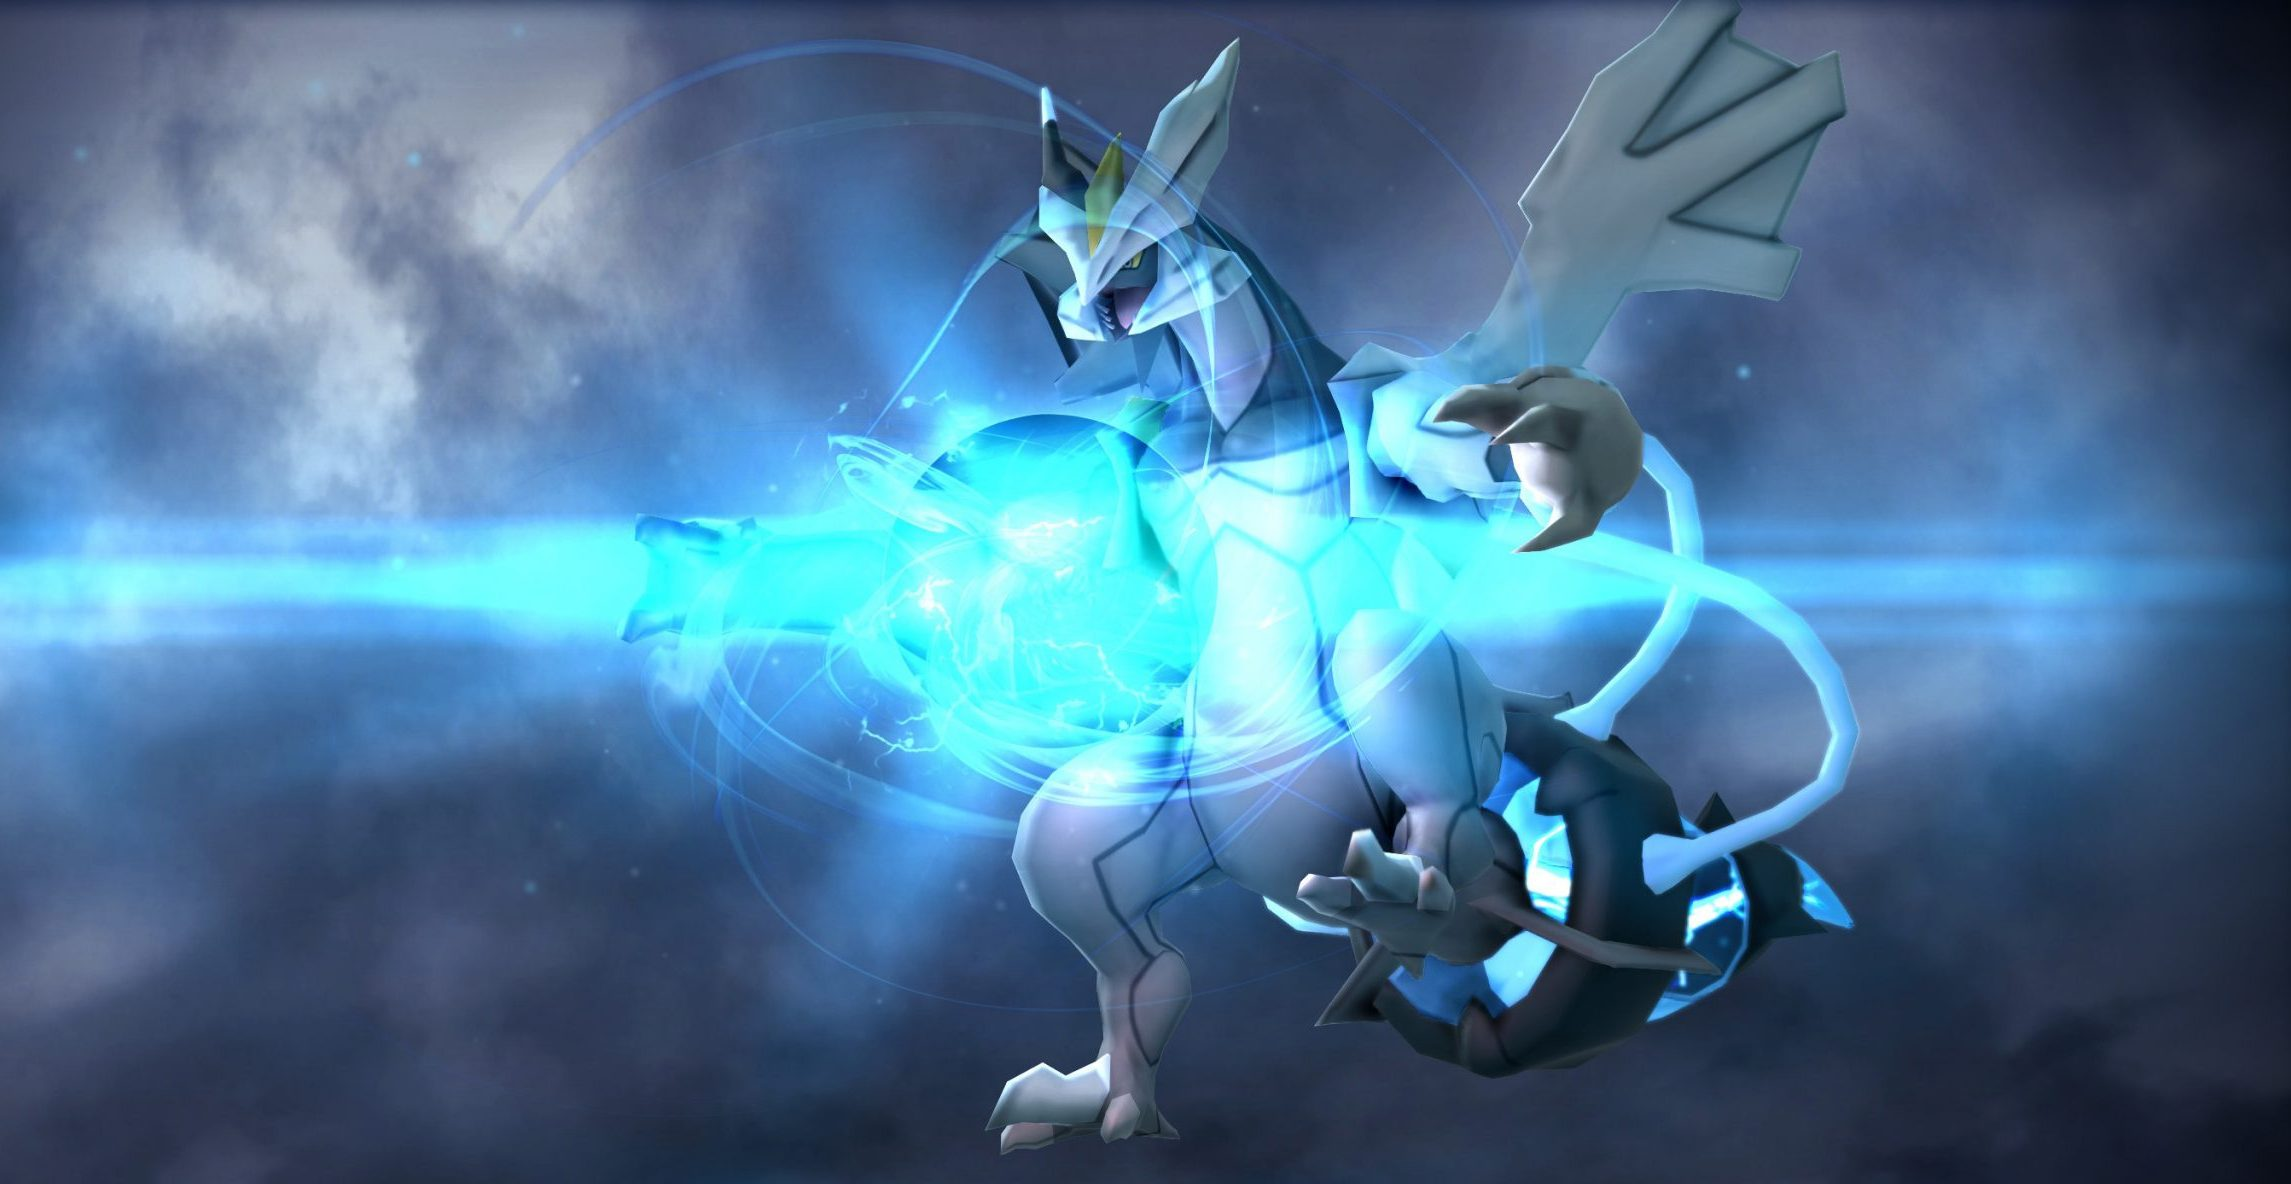 Kyurem is a powerful special attacker in battle thanks to its high base stat in Special Attack, which is one of its strongest attributes. 